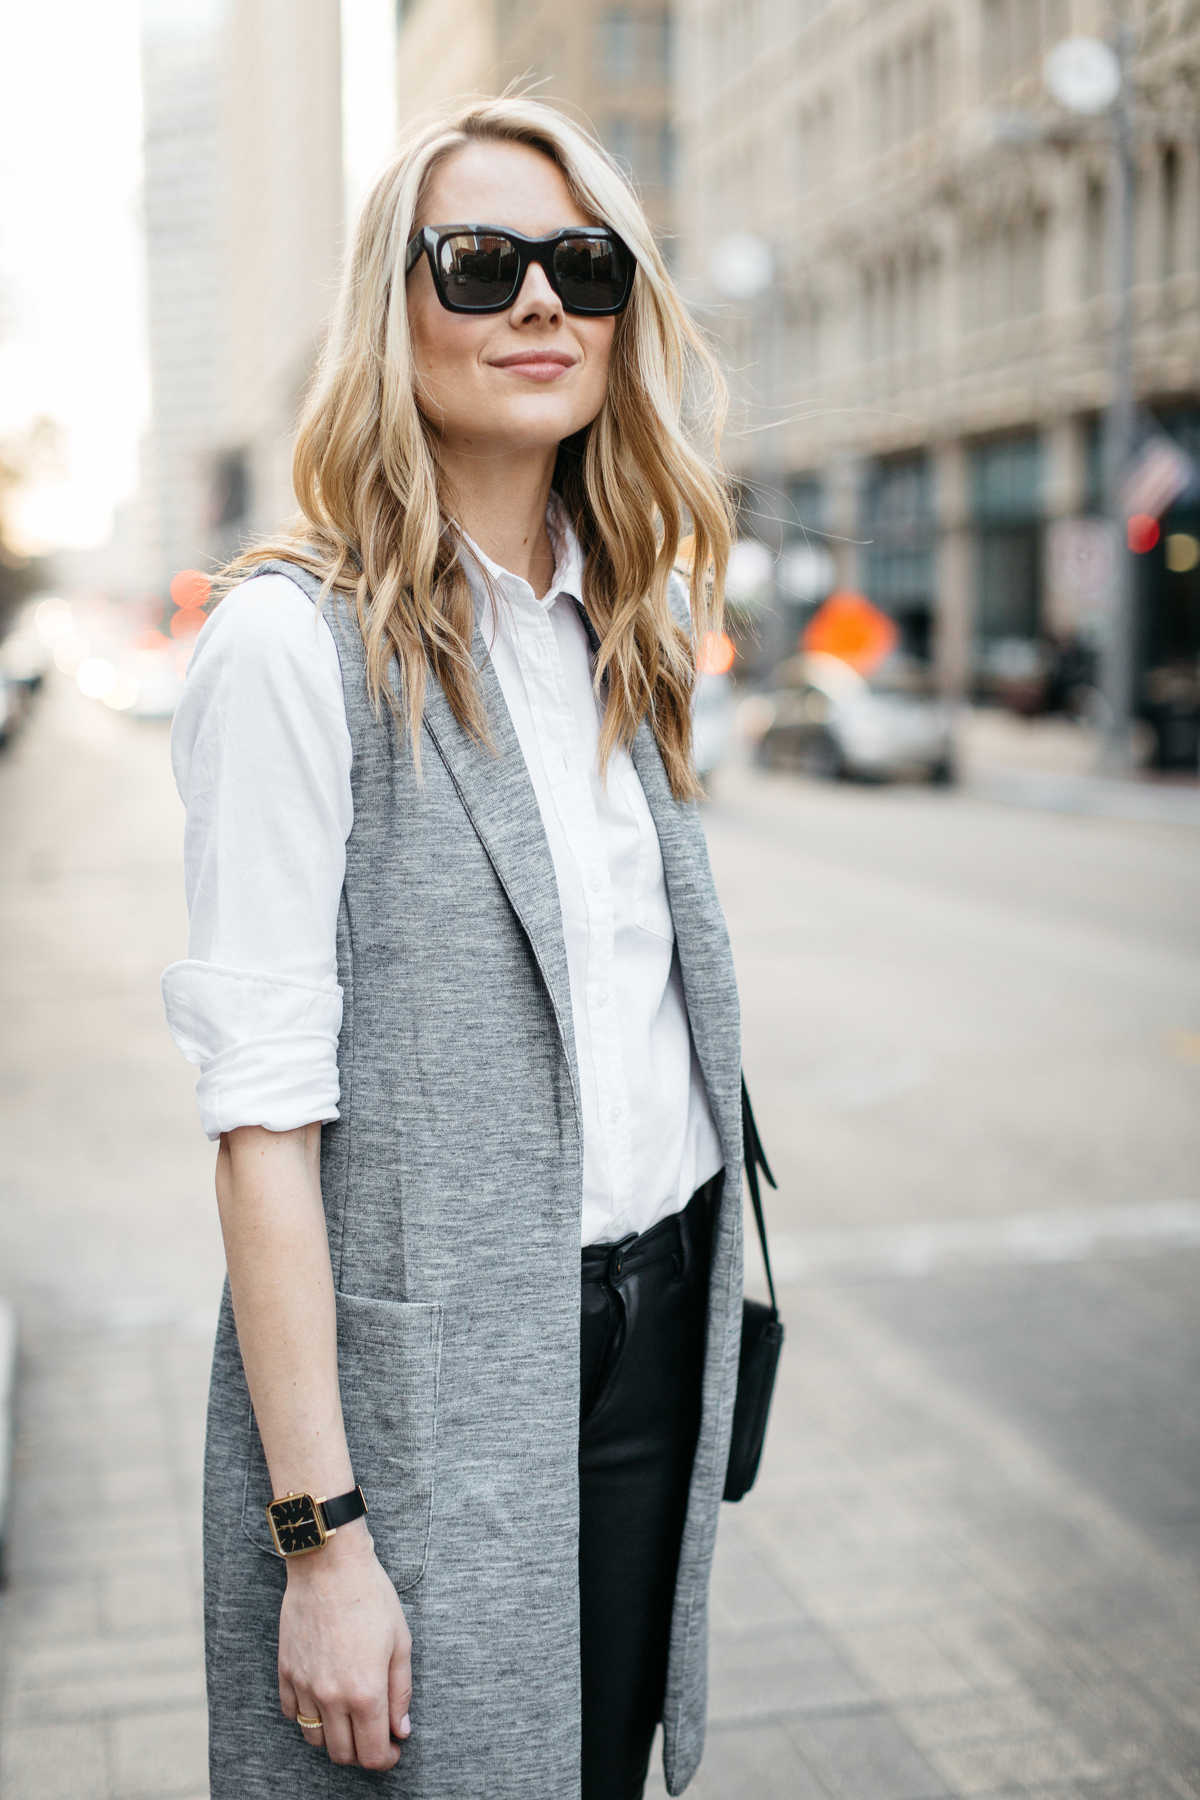 Fall Outfit, Winter Outfit, White Button-Down Shirt, Long Grey Vest